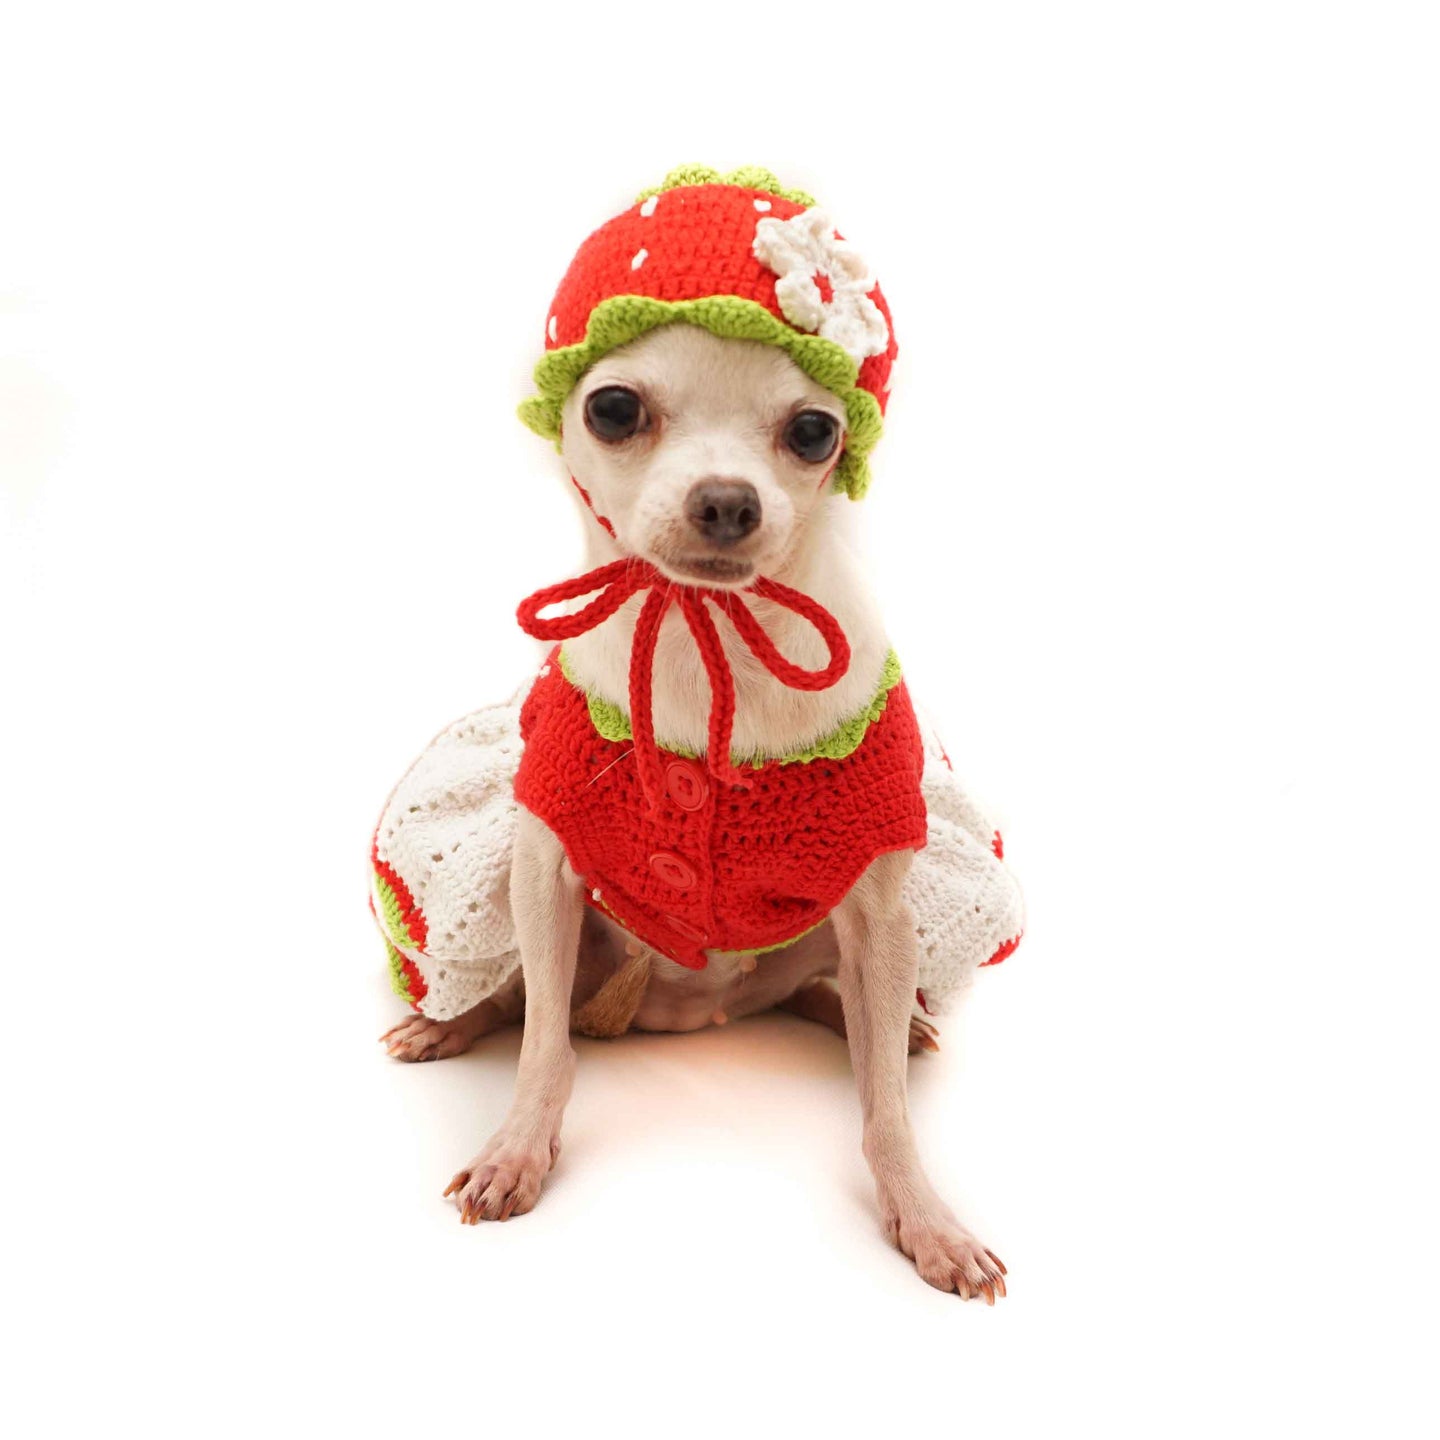 Sweet Strawberry Outfit with Strawberry Hat